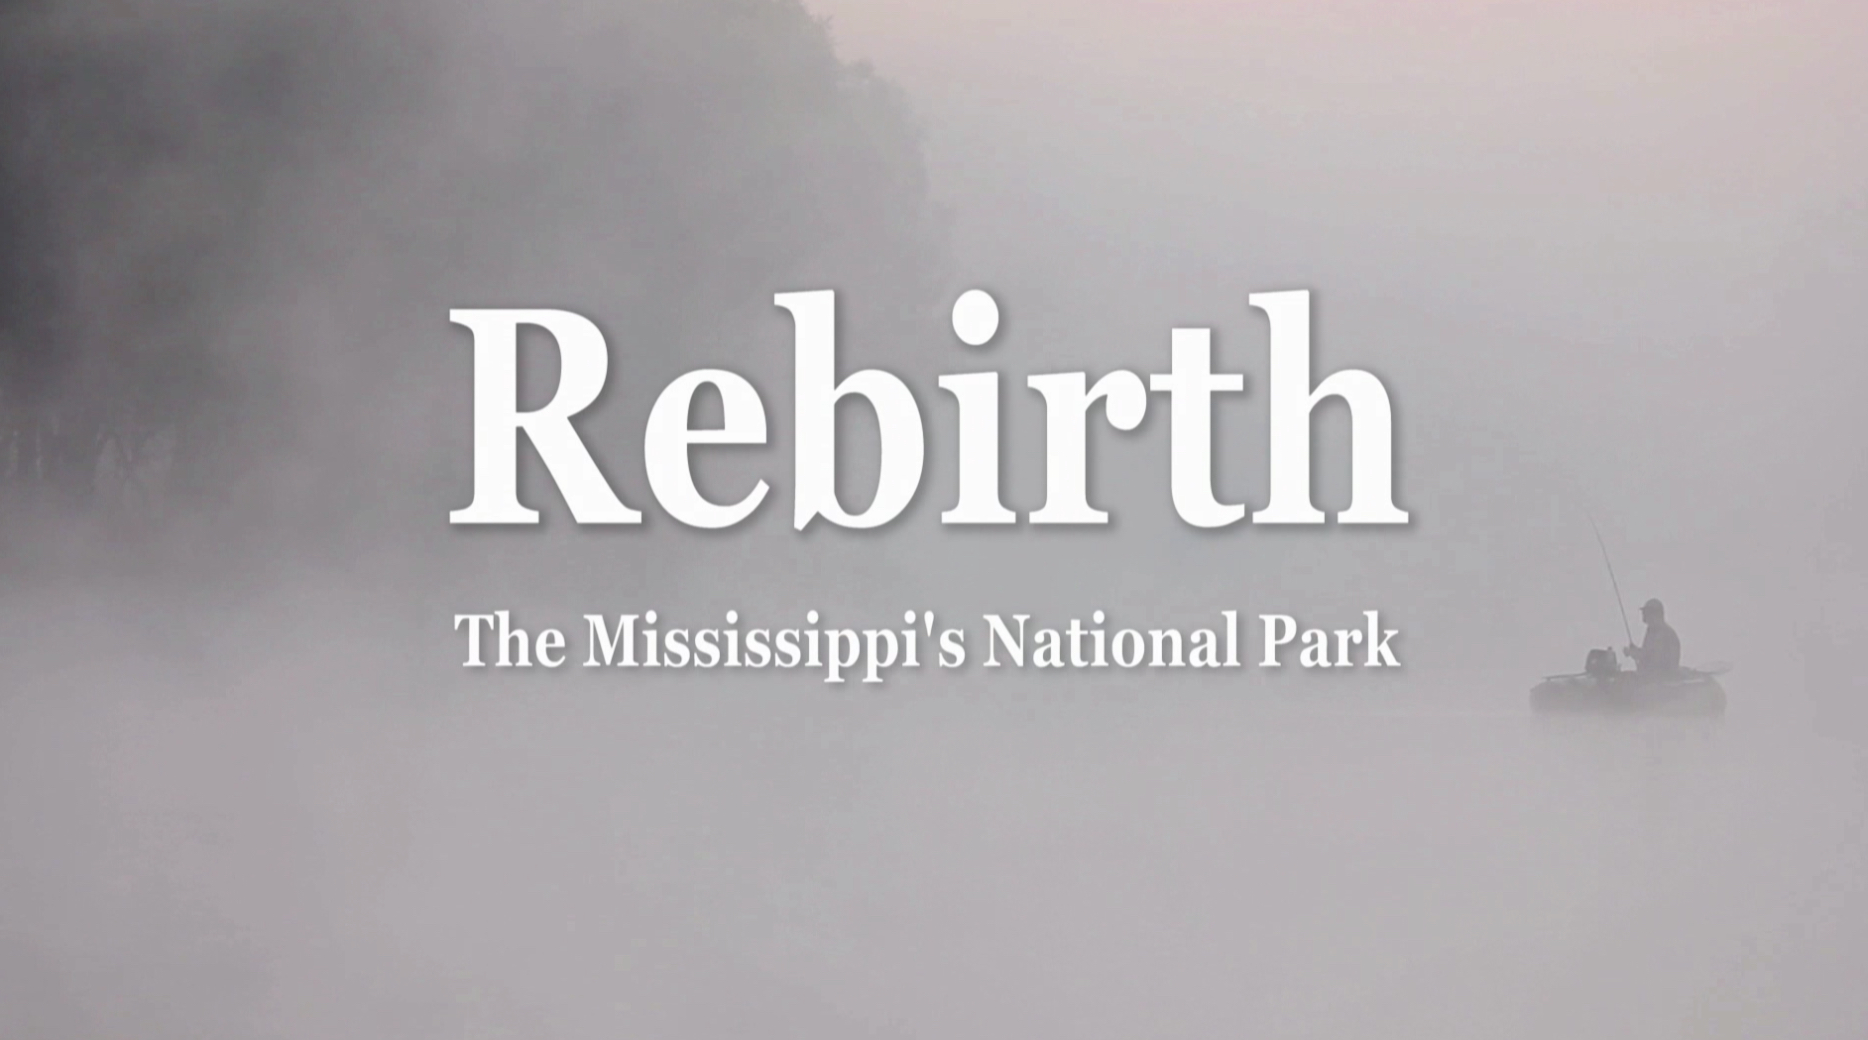 Our local Mississippi River is also a national park